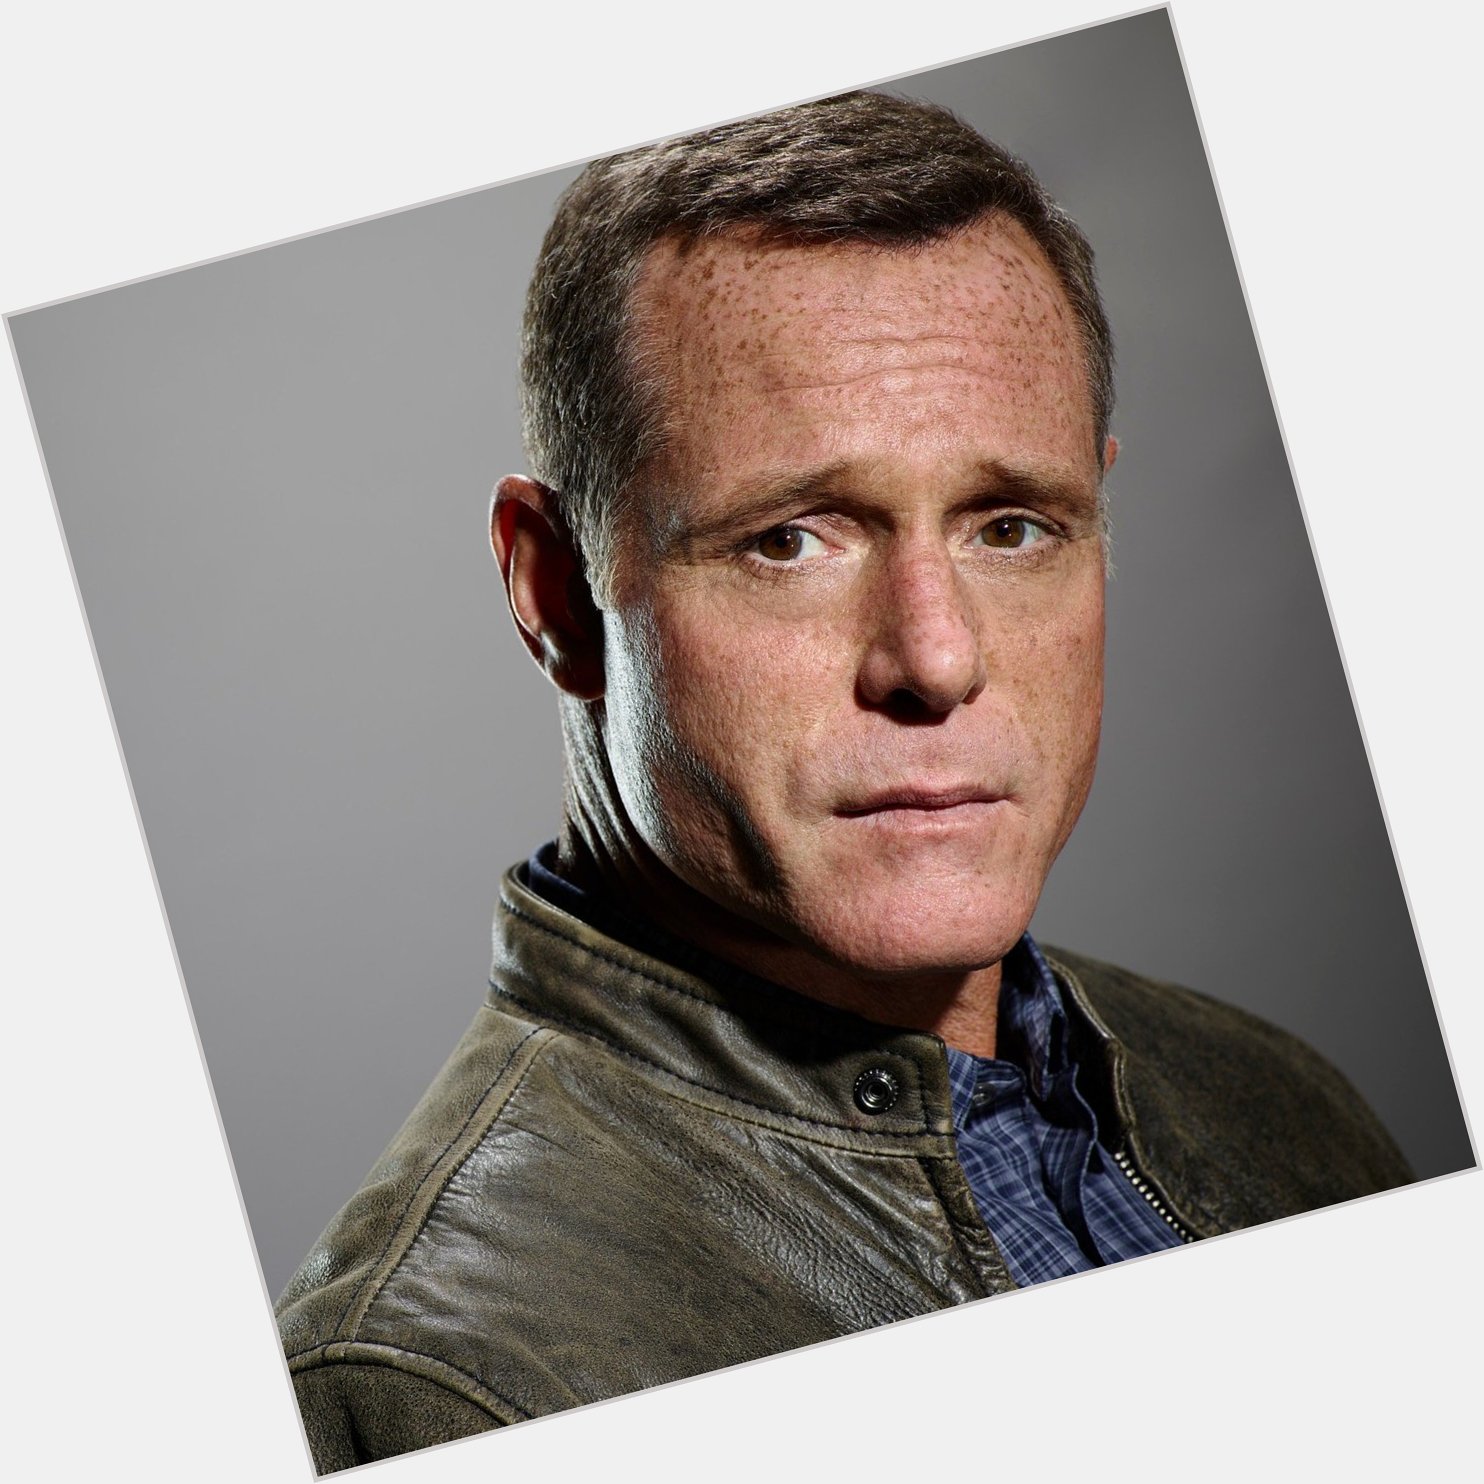 The tough guy from \Chicago P.D.\, Jason Beghe has his birthday today! Happy birthday, Hank! 